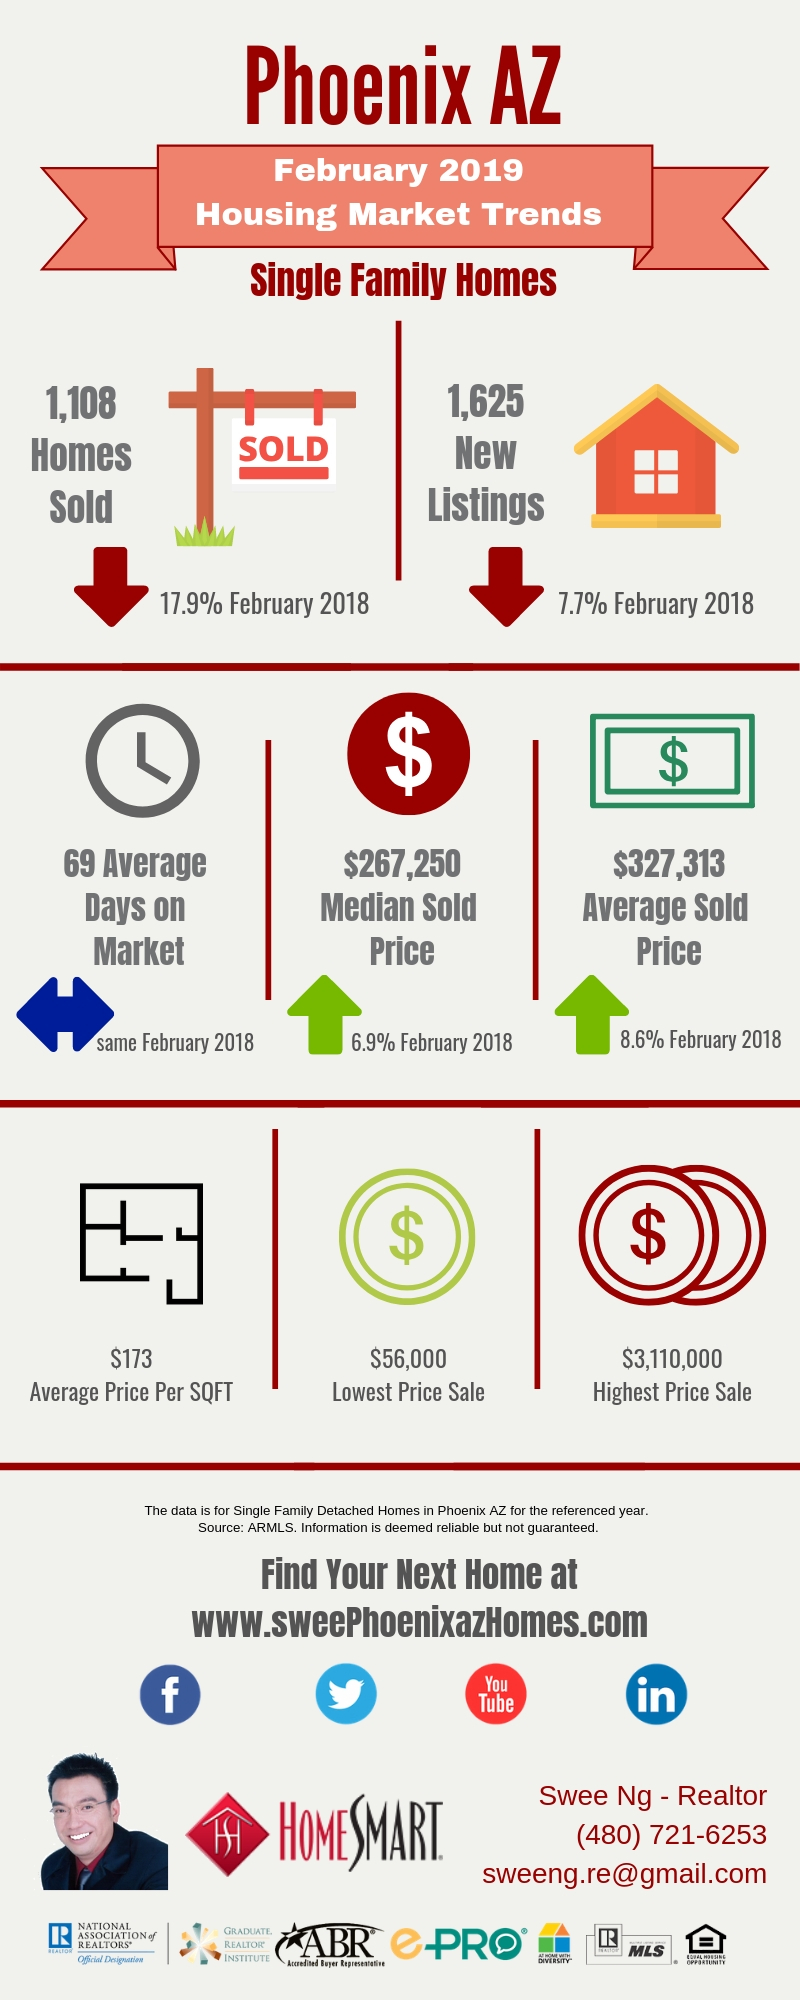 Phoenix AZ Housing Market Trends Report February 2019 by Swee Ng